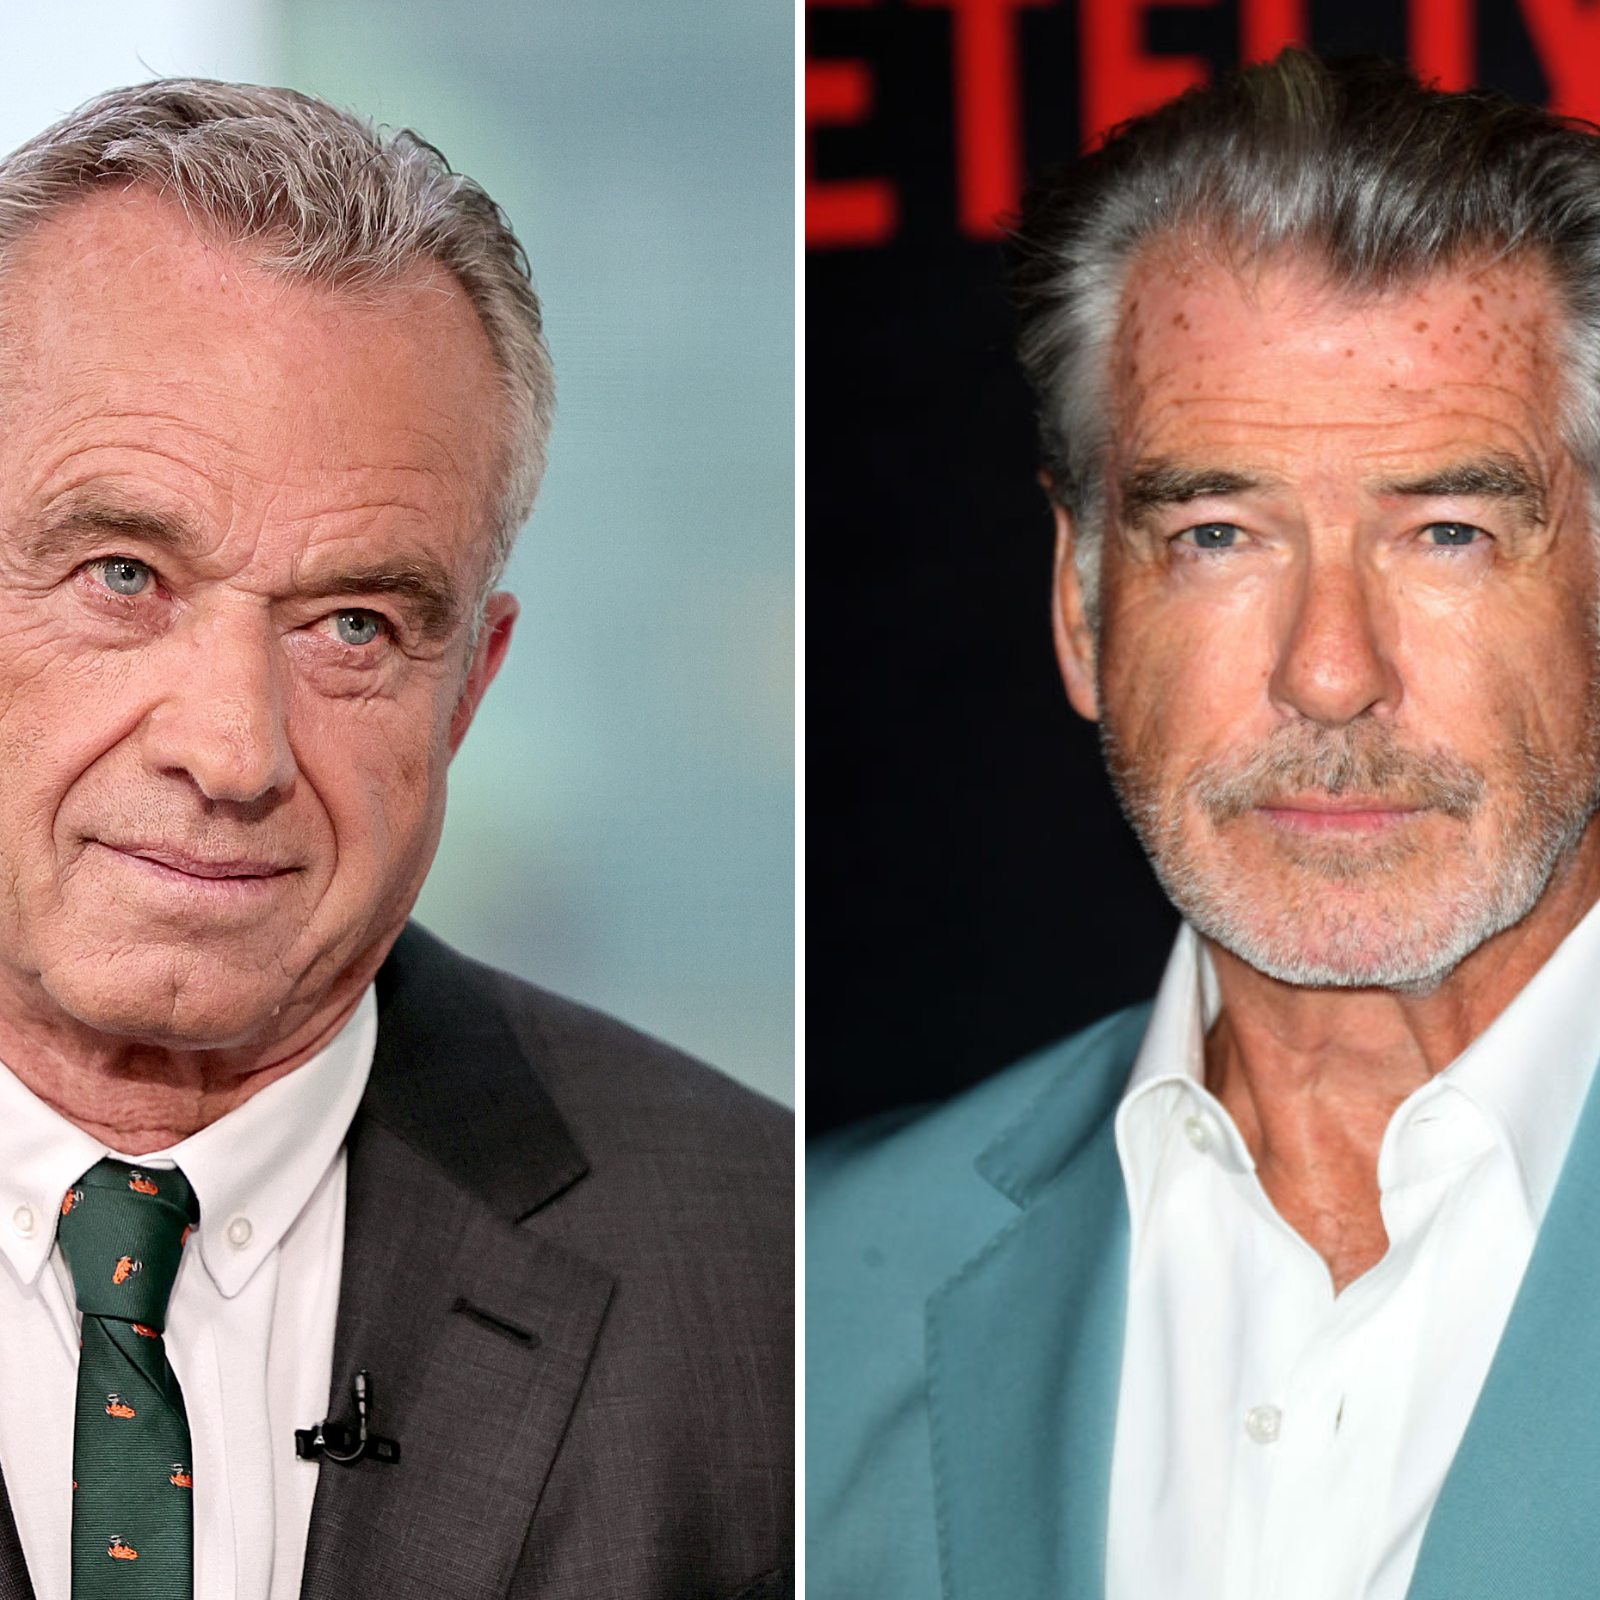 Pierce Brosnan's RFK Jr. Support Sparks Fury From Fans: 'Traitor